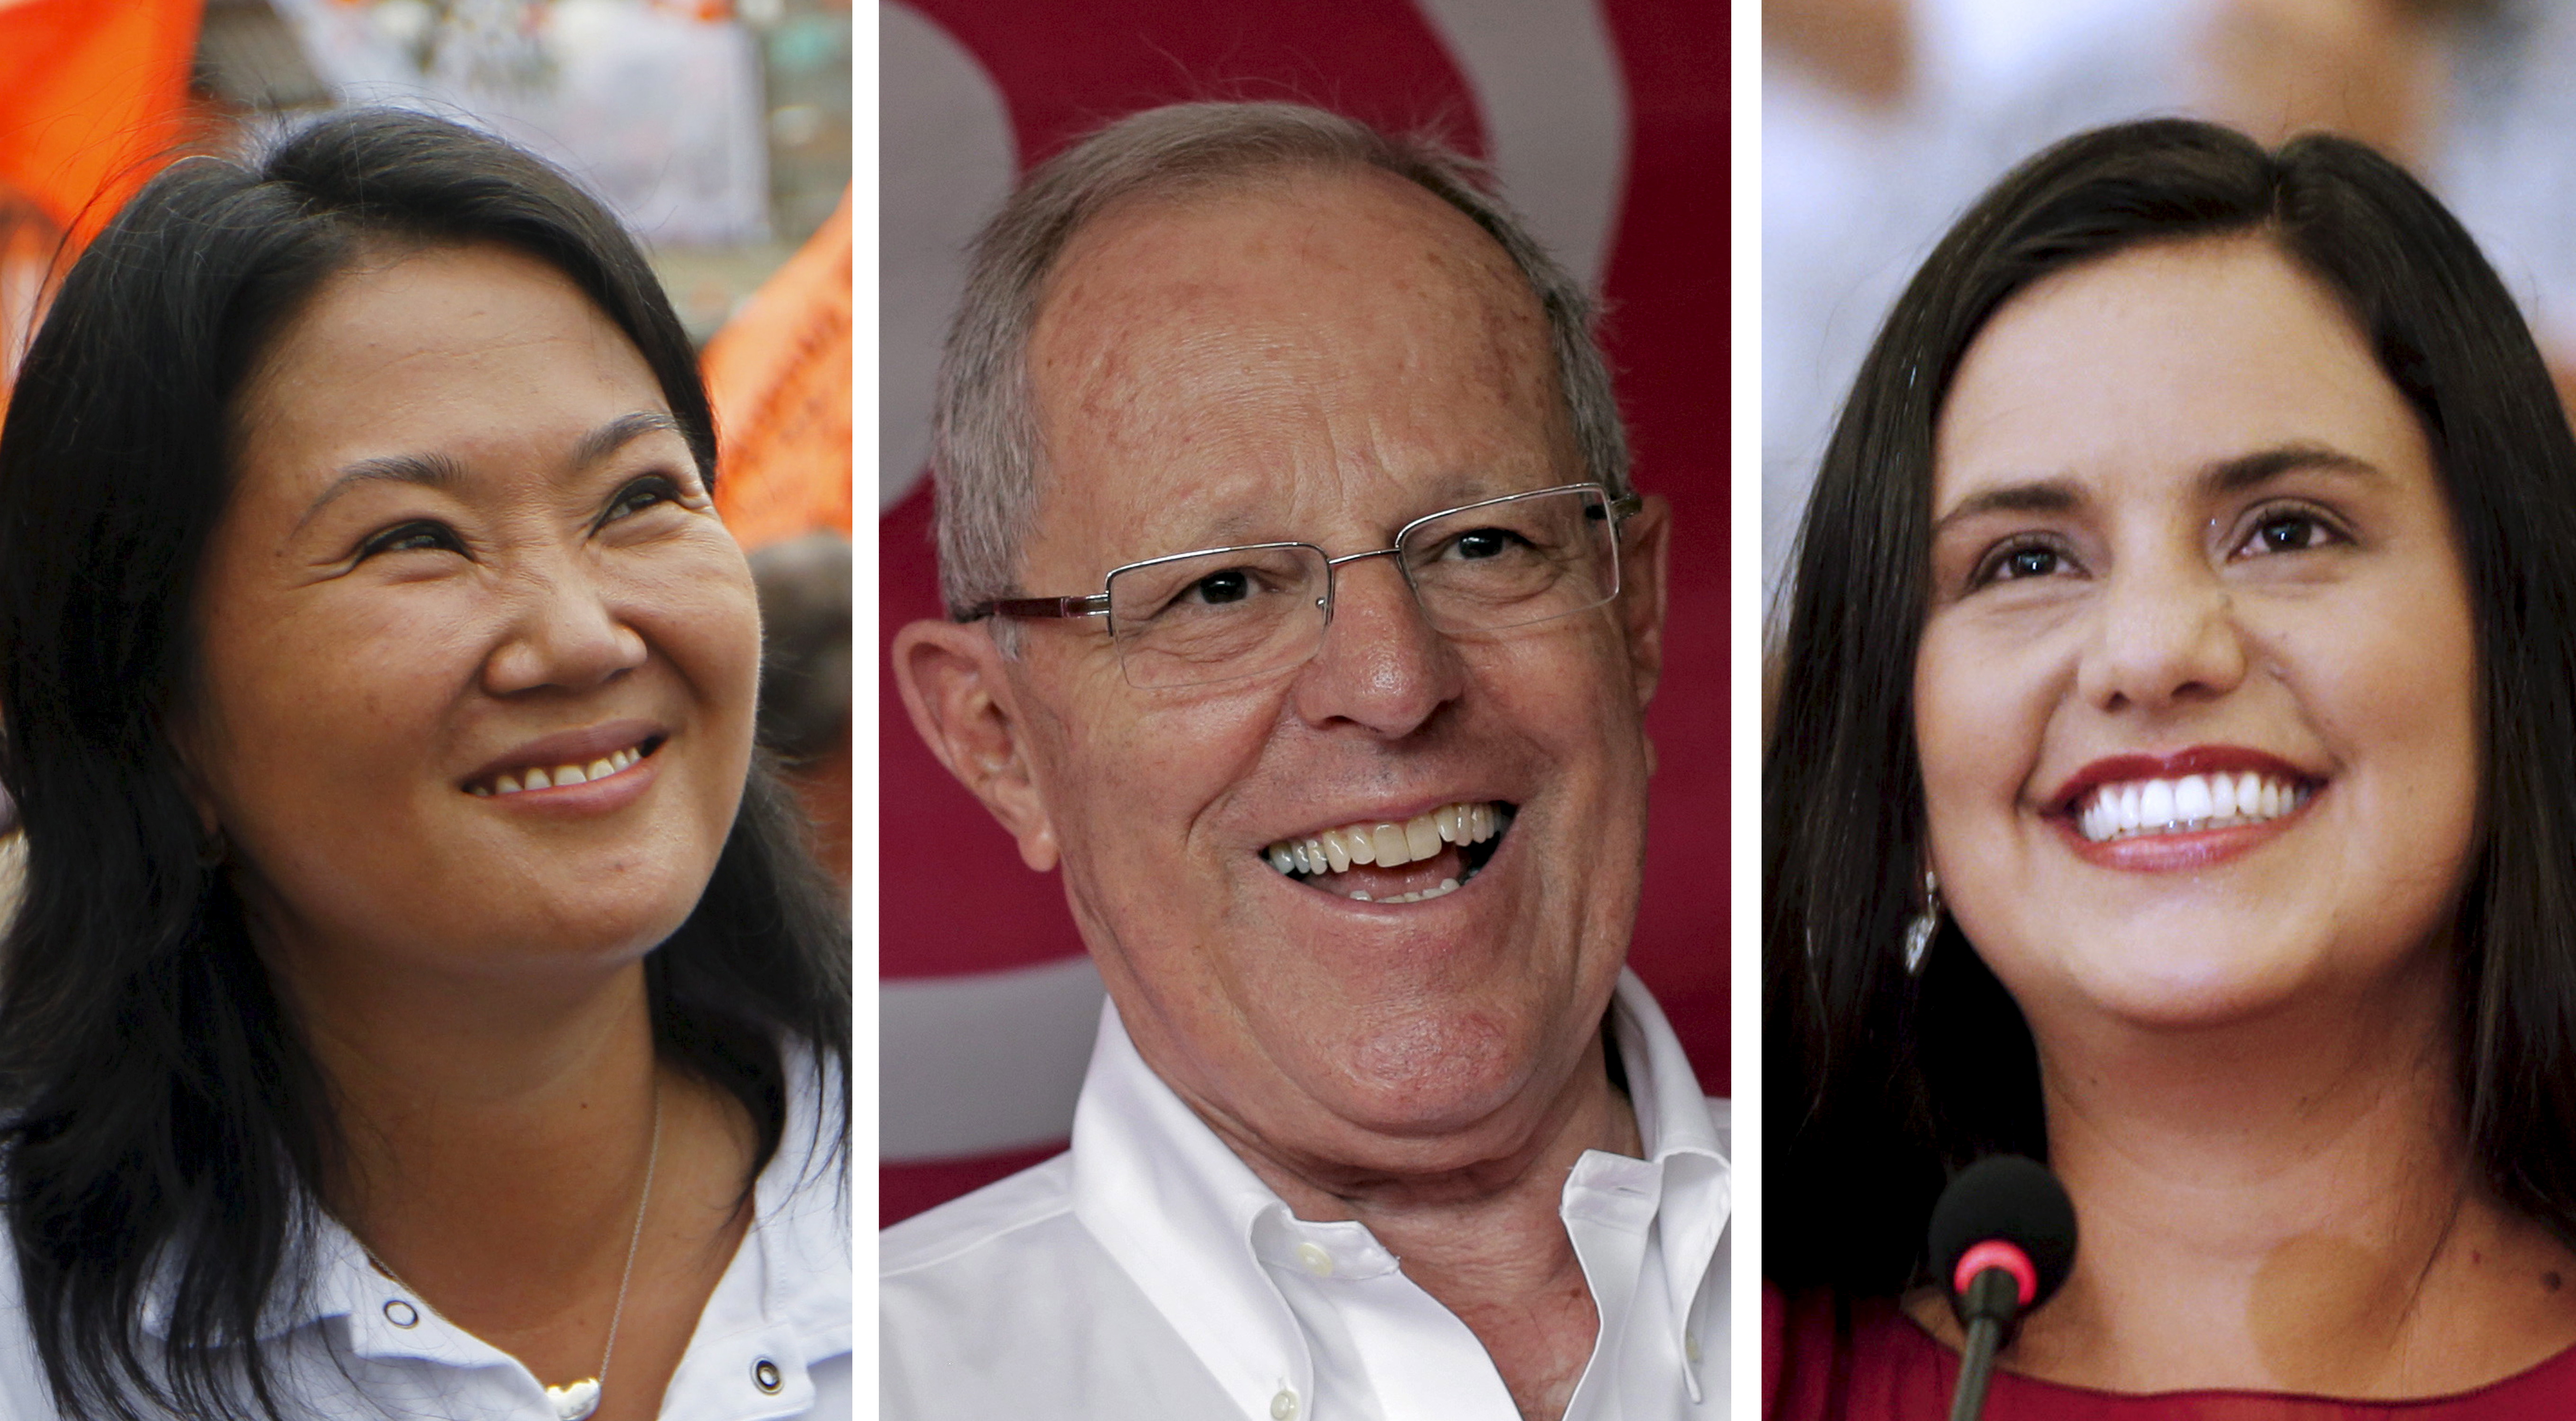 Peru heading into the runoff election